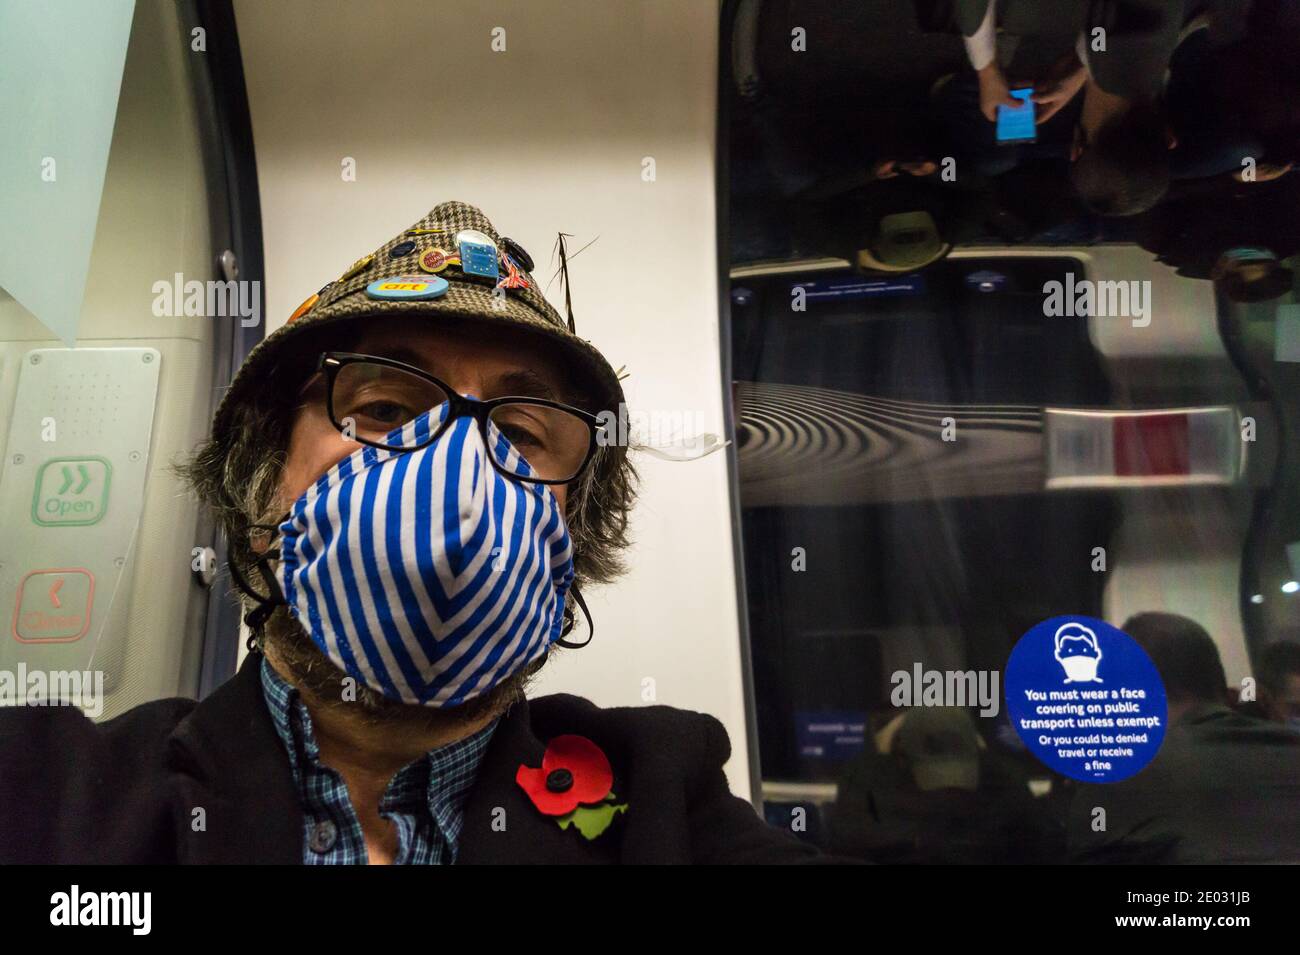 Selfie self-portrait of a  middle aged man wearing face mask on London Underground train showing face covering warning sign during Covid-19 pandemic Stock Photo